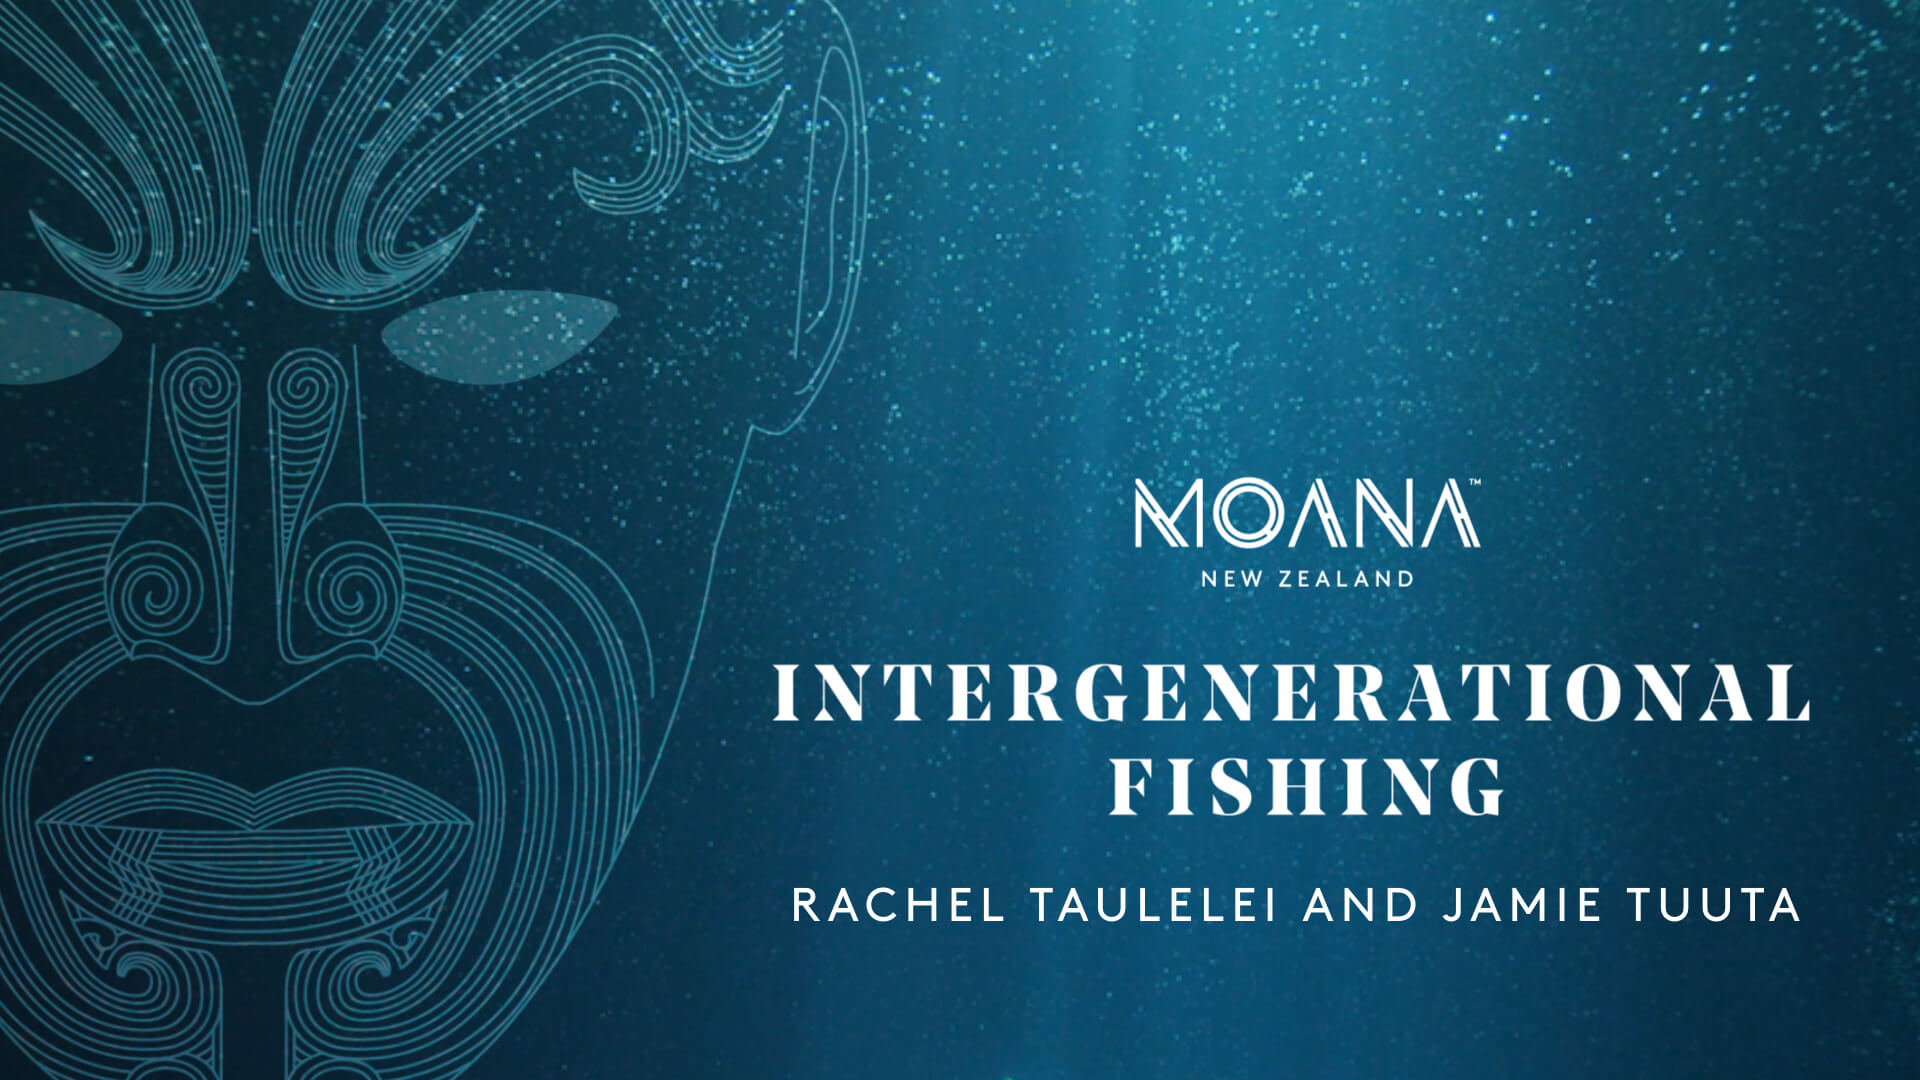 Video: Responsible fishing is looking through an intergenerational lens